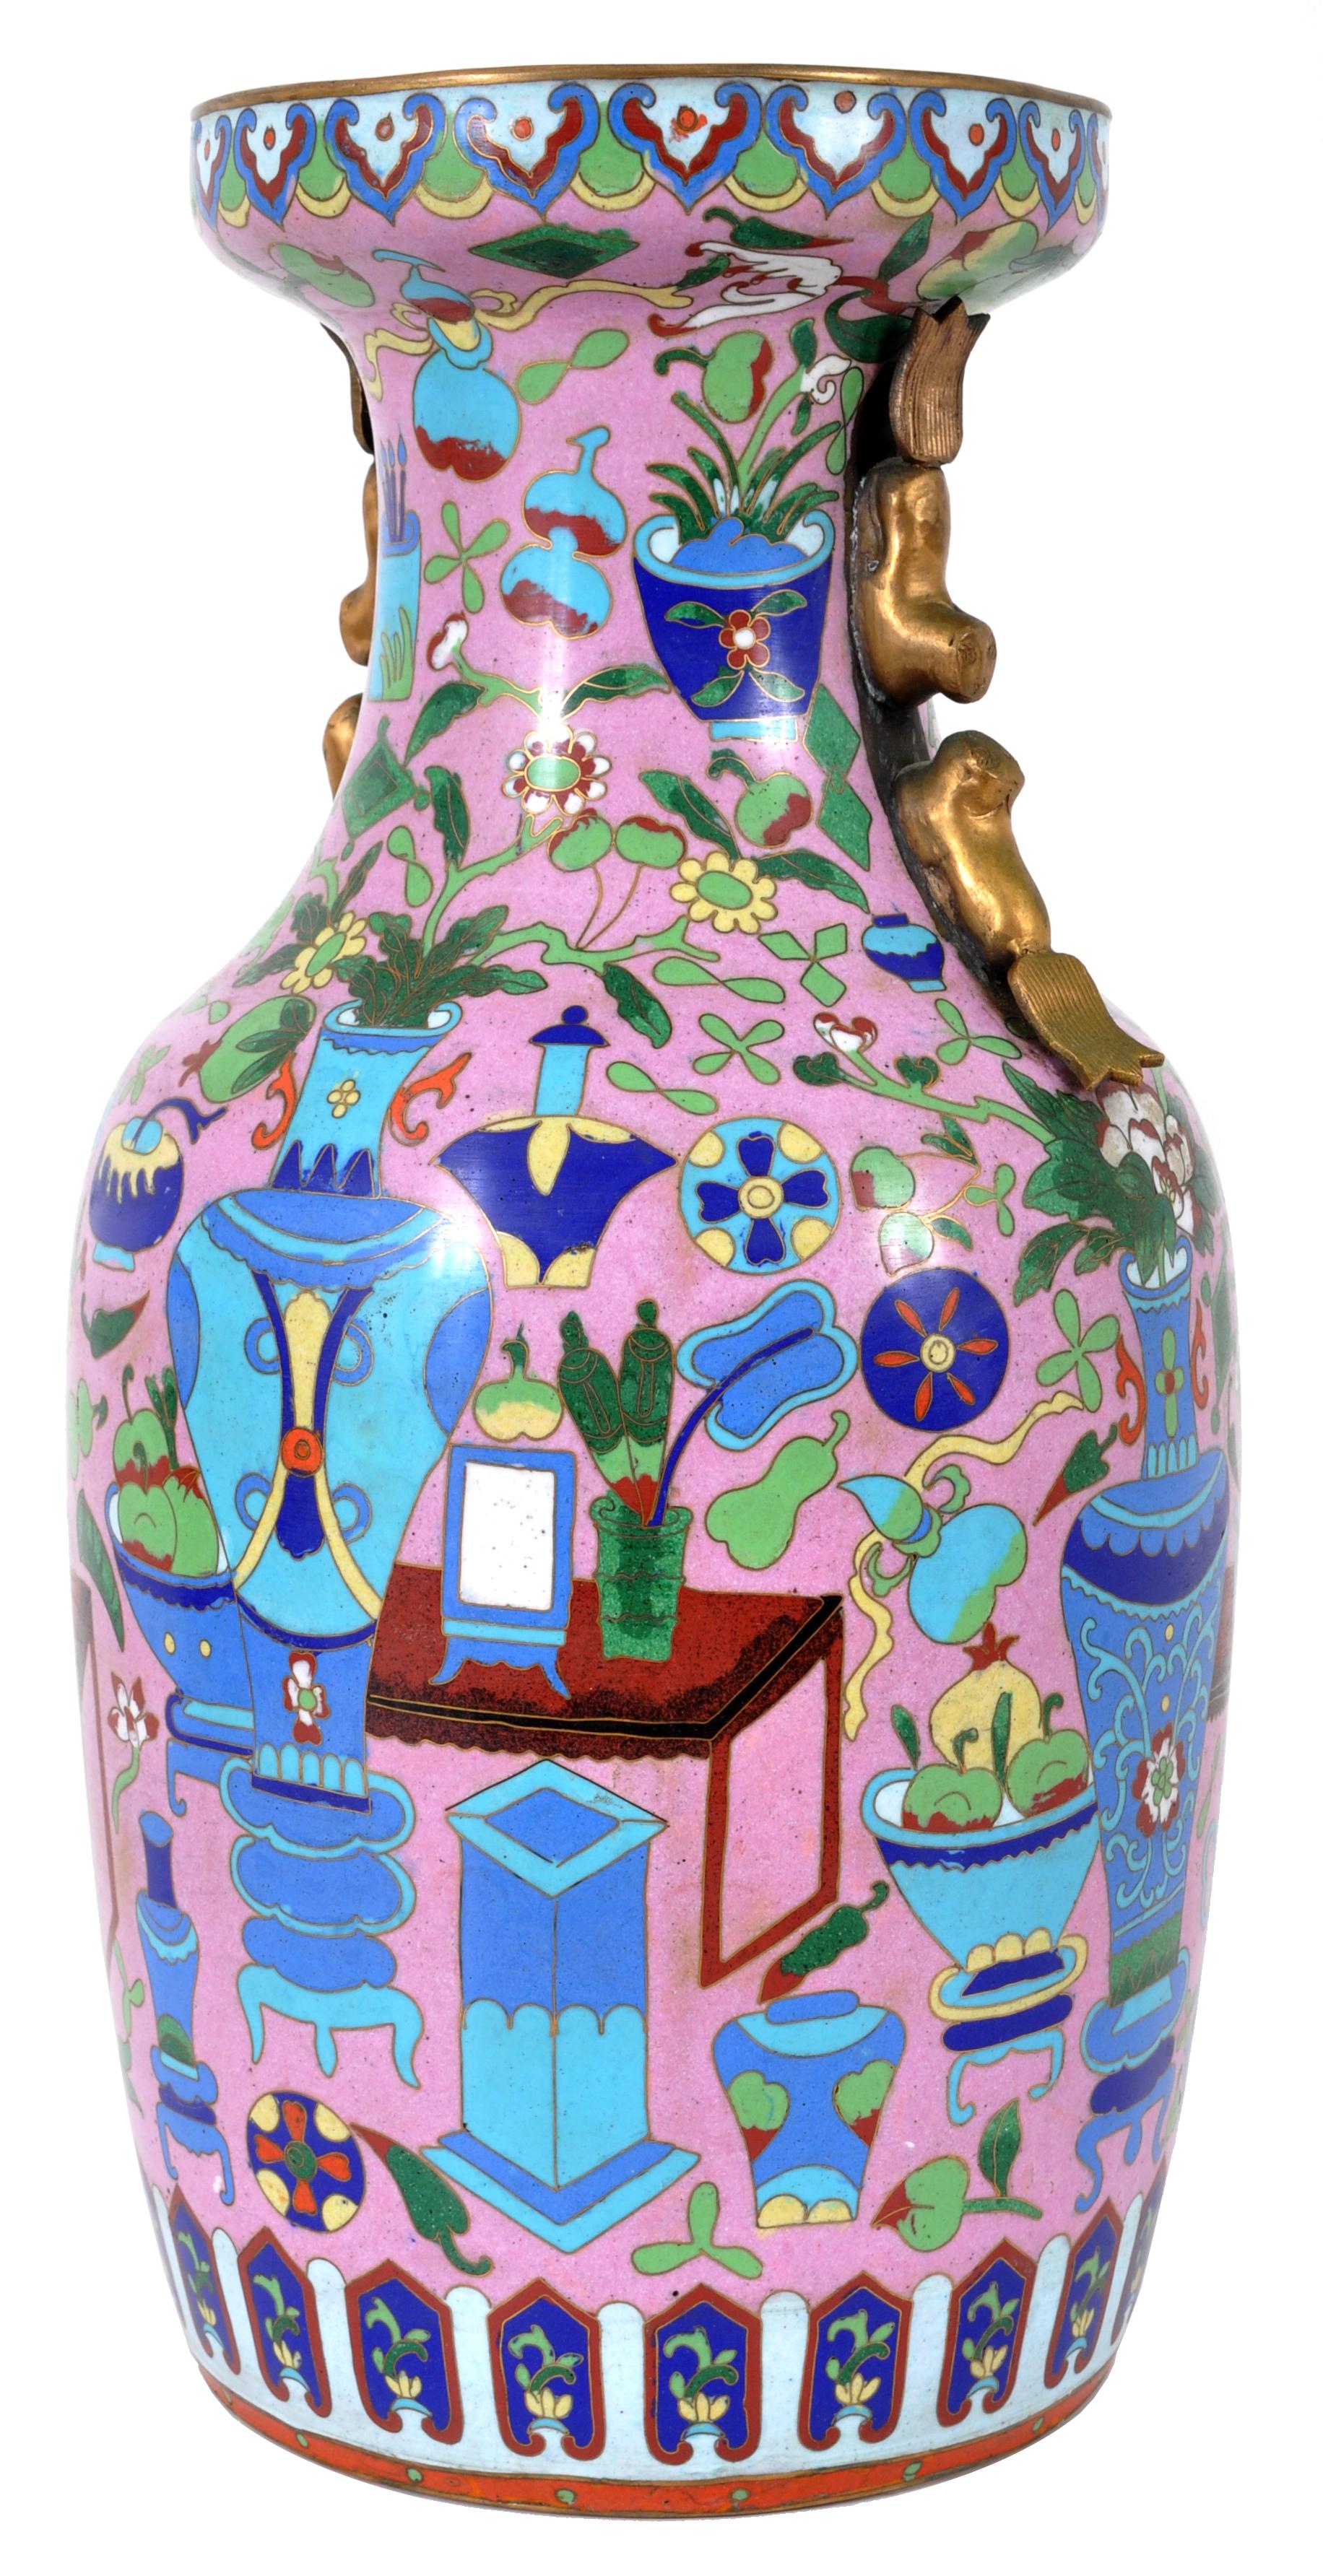 A large and fine antique Chinese Cloisonné vase, circa 1920. The vase decorated with lappets to the top and profusely decorated with vases, scholars objects, furniture and flowering urns as well as other geometric devices. The vase having a band of